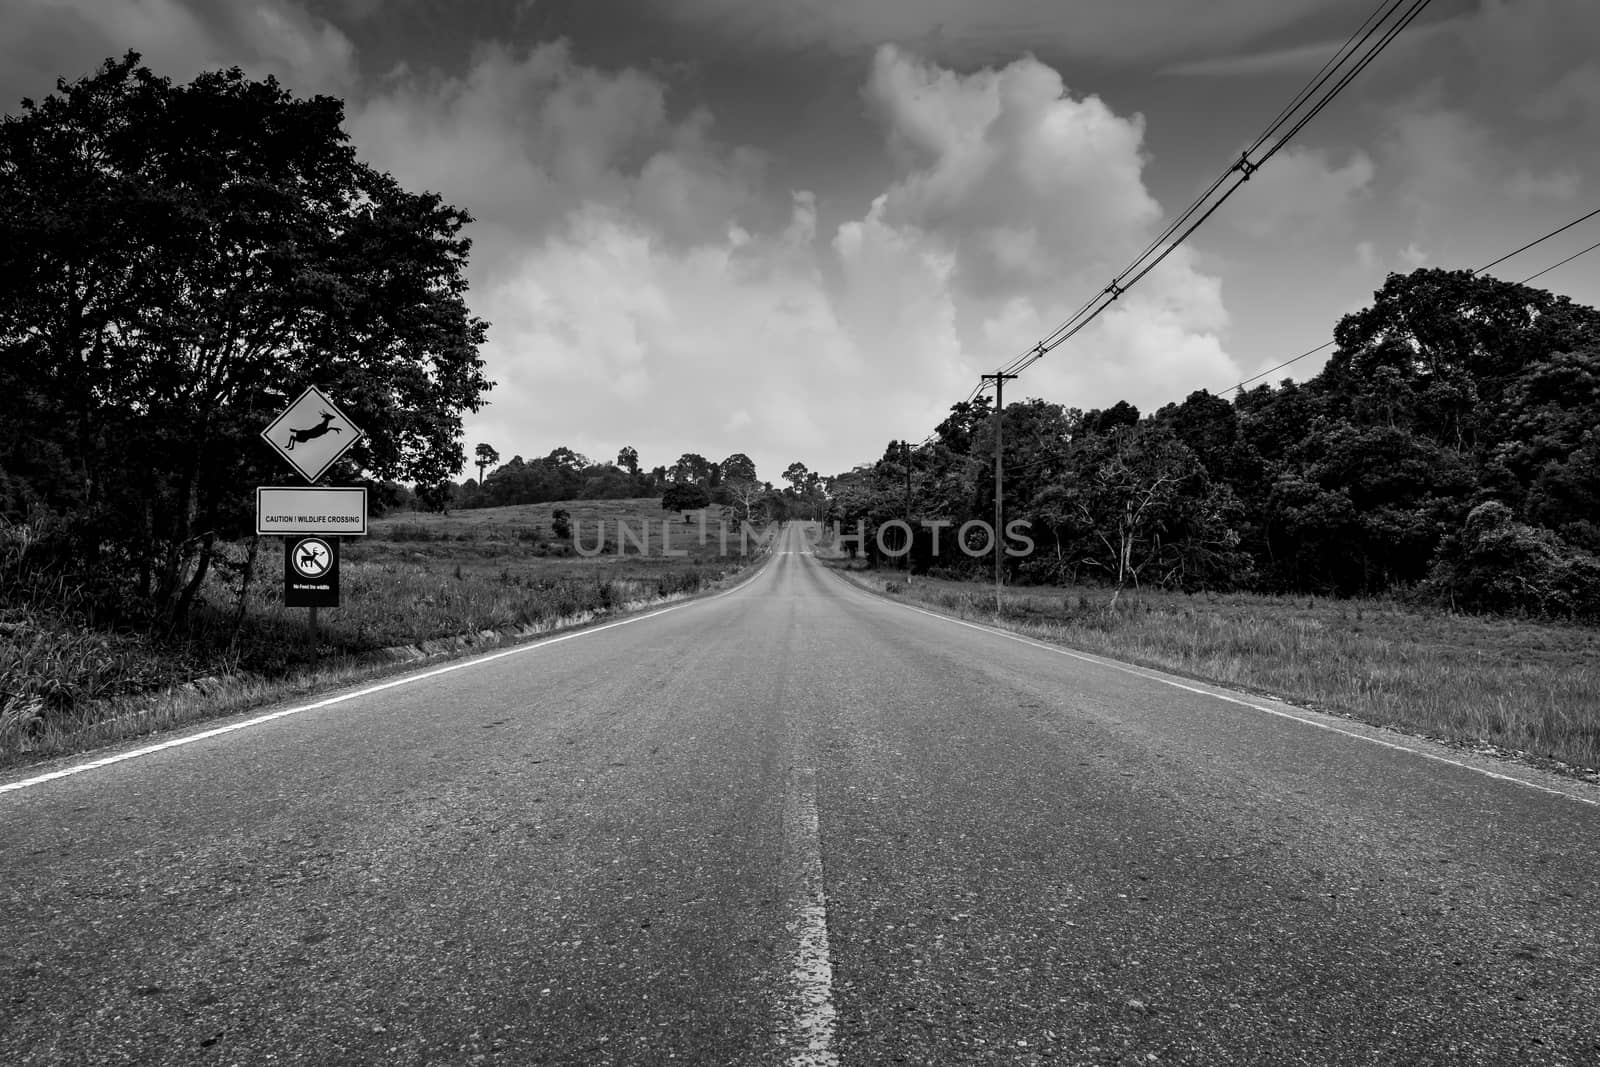 Endless straight road running through the forest with scenery of grass field and trees with cumulus clouds and sky in black and white scene. Death background by Fahroni